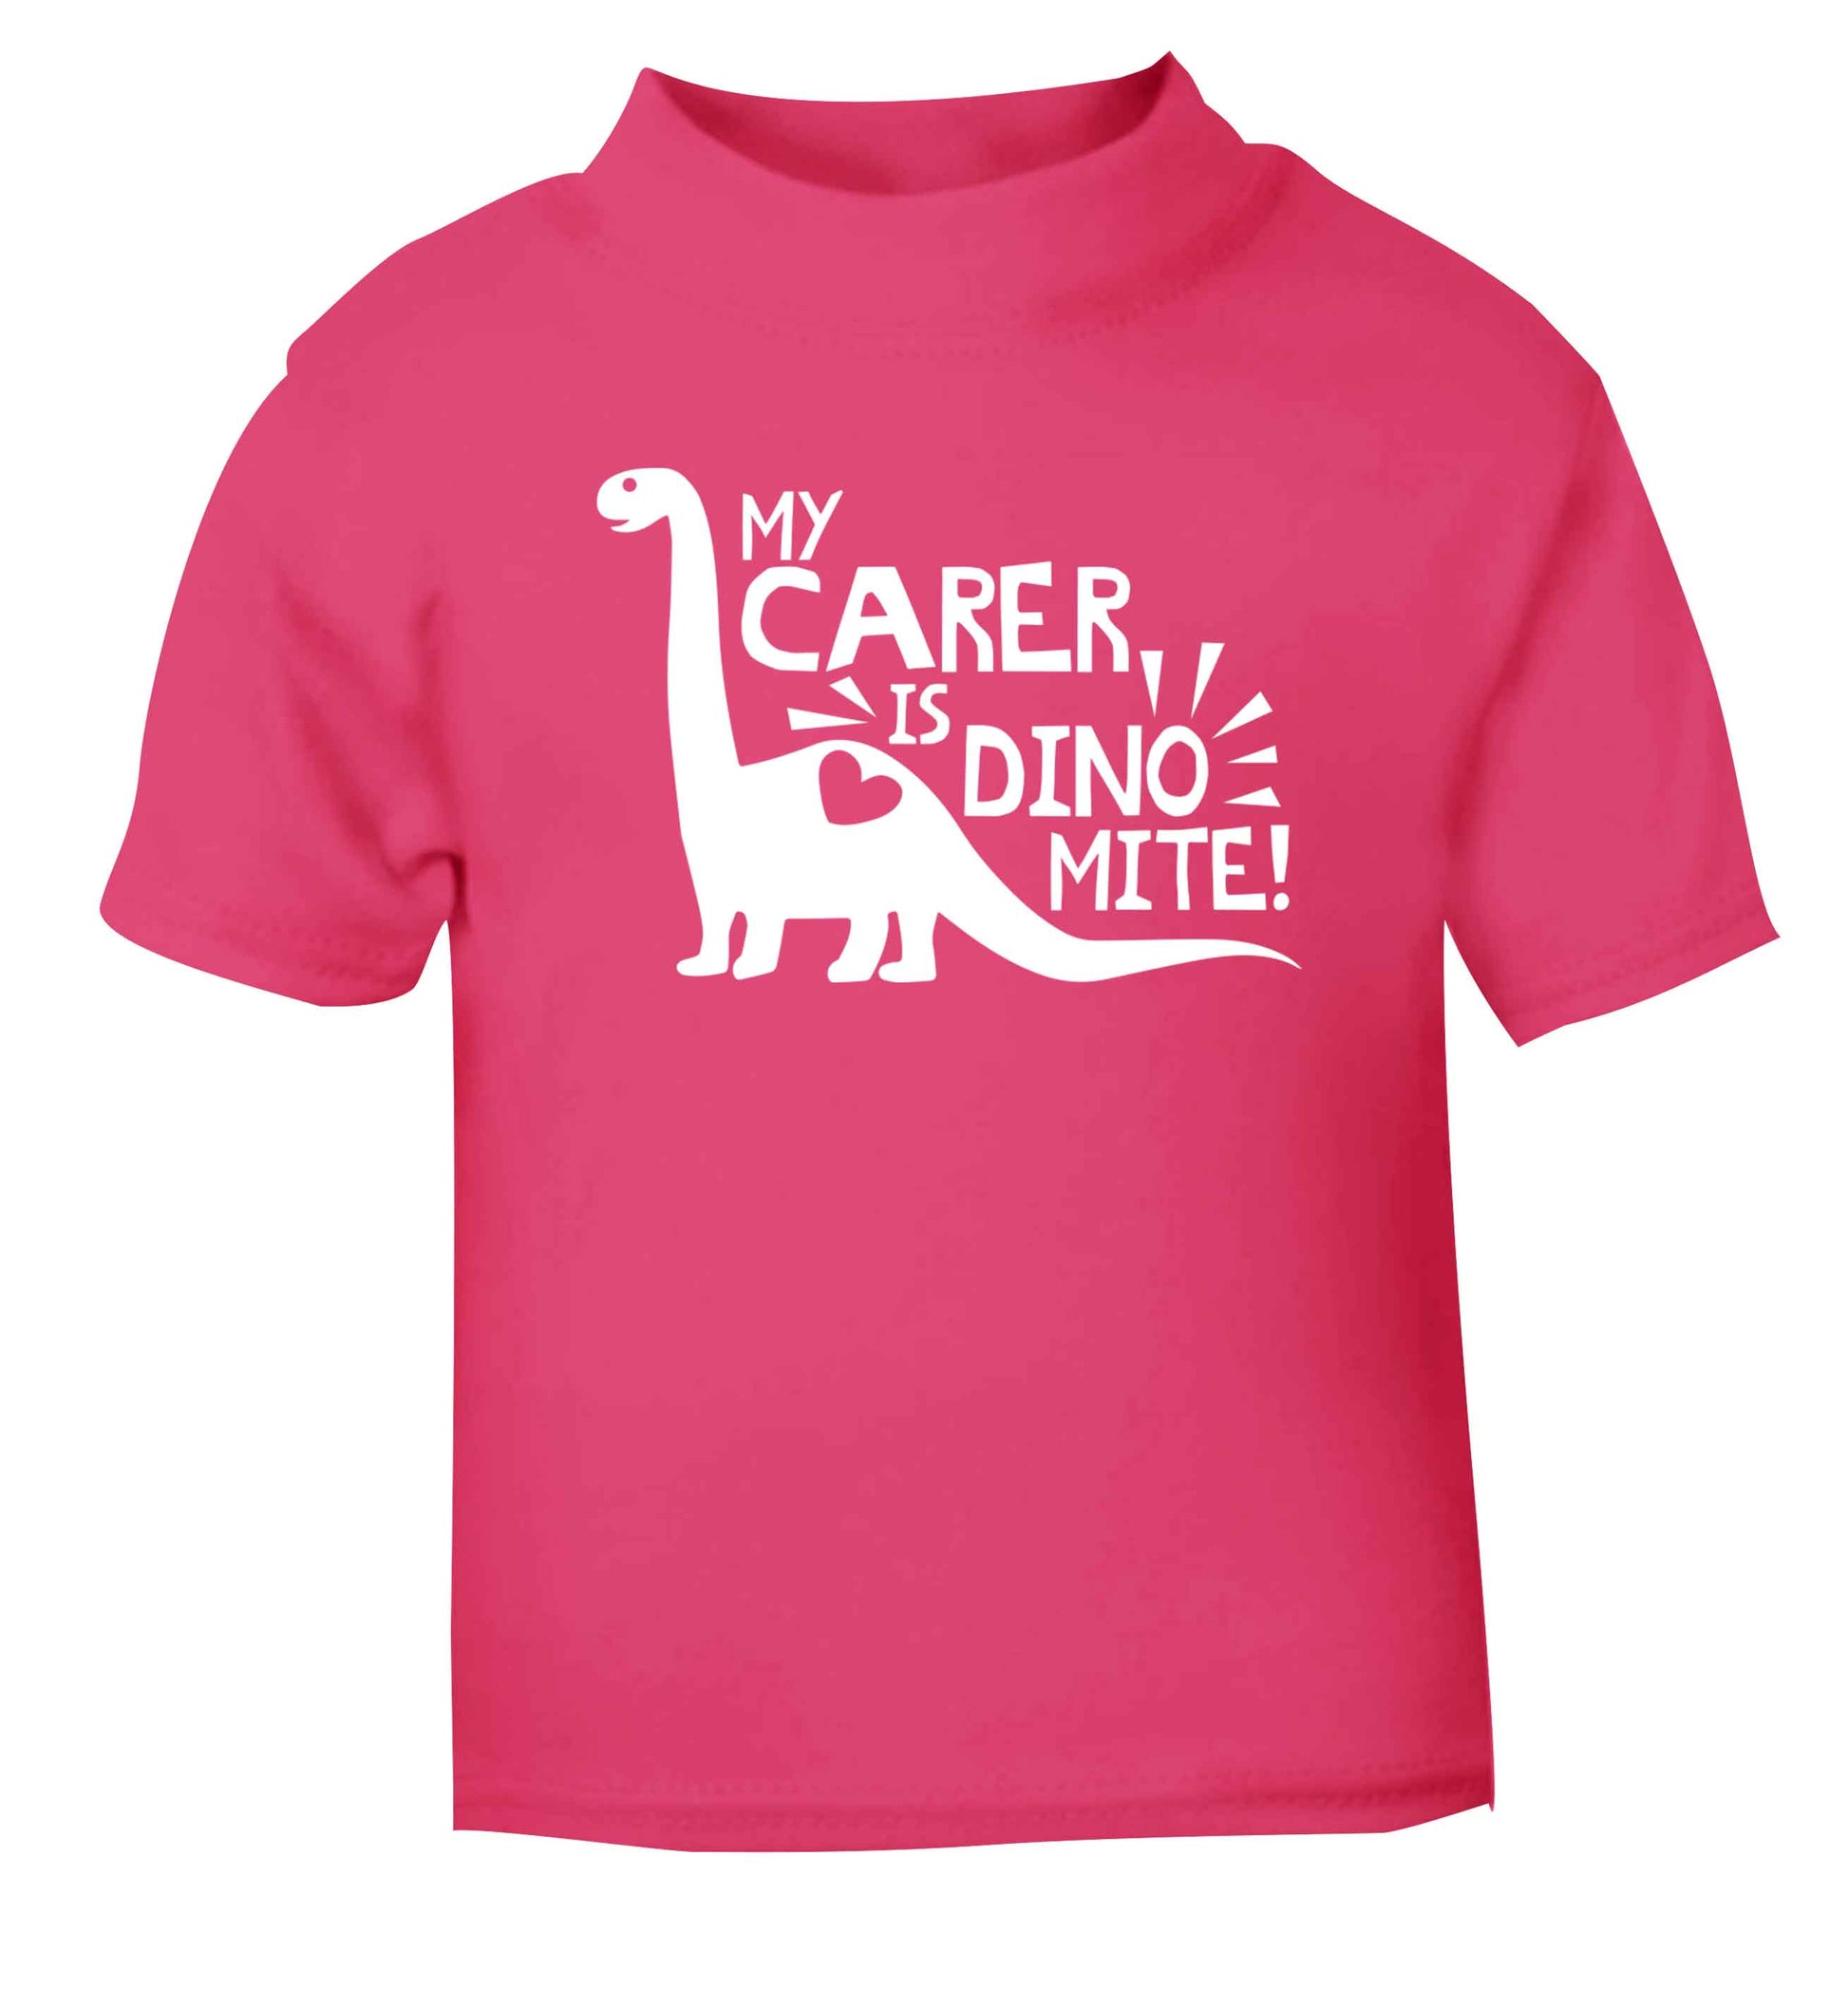 My carer is dinomite! pink Baby Toddler Tshirt 2 Years